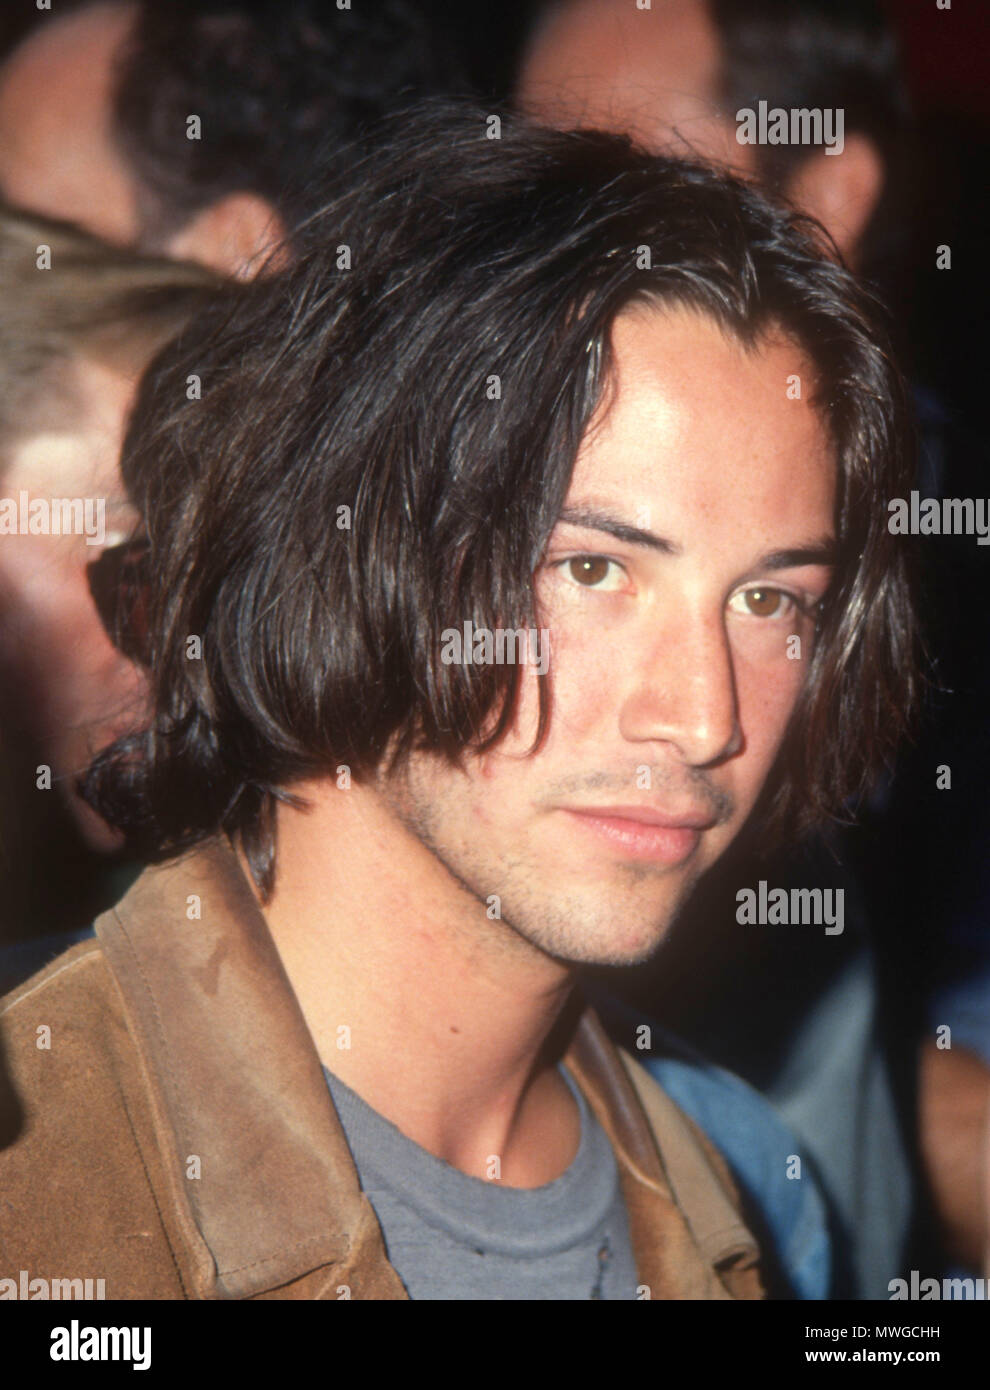 HOLLYWOOD, CA - JULY 11: Actor Keanu Reeves attends the 'Bill & Ted's Bogus Journey' Hollywood Premiere on July 11, 1991 at Mann's Chinese Theatre in Hollywood, California. Photo by Barry King/Alamy Stock Photo Stock Photo